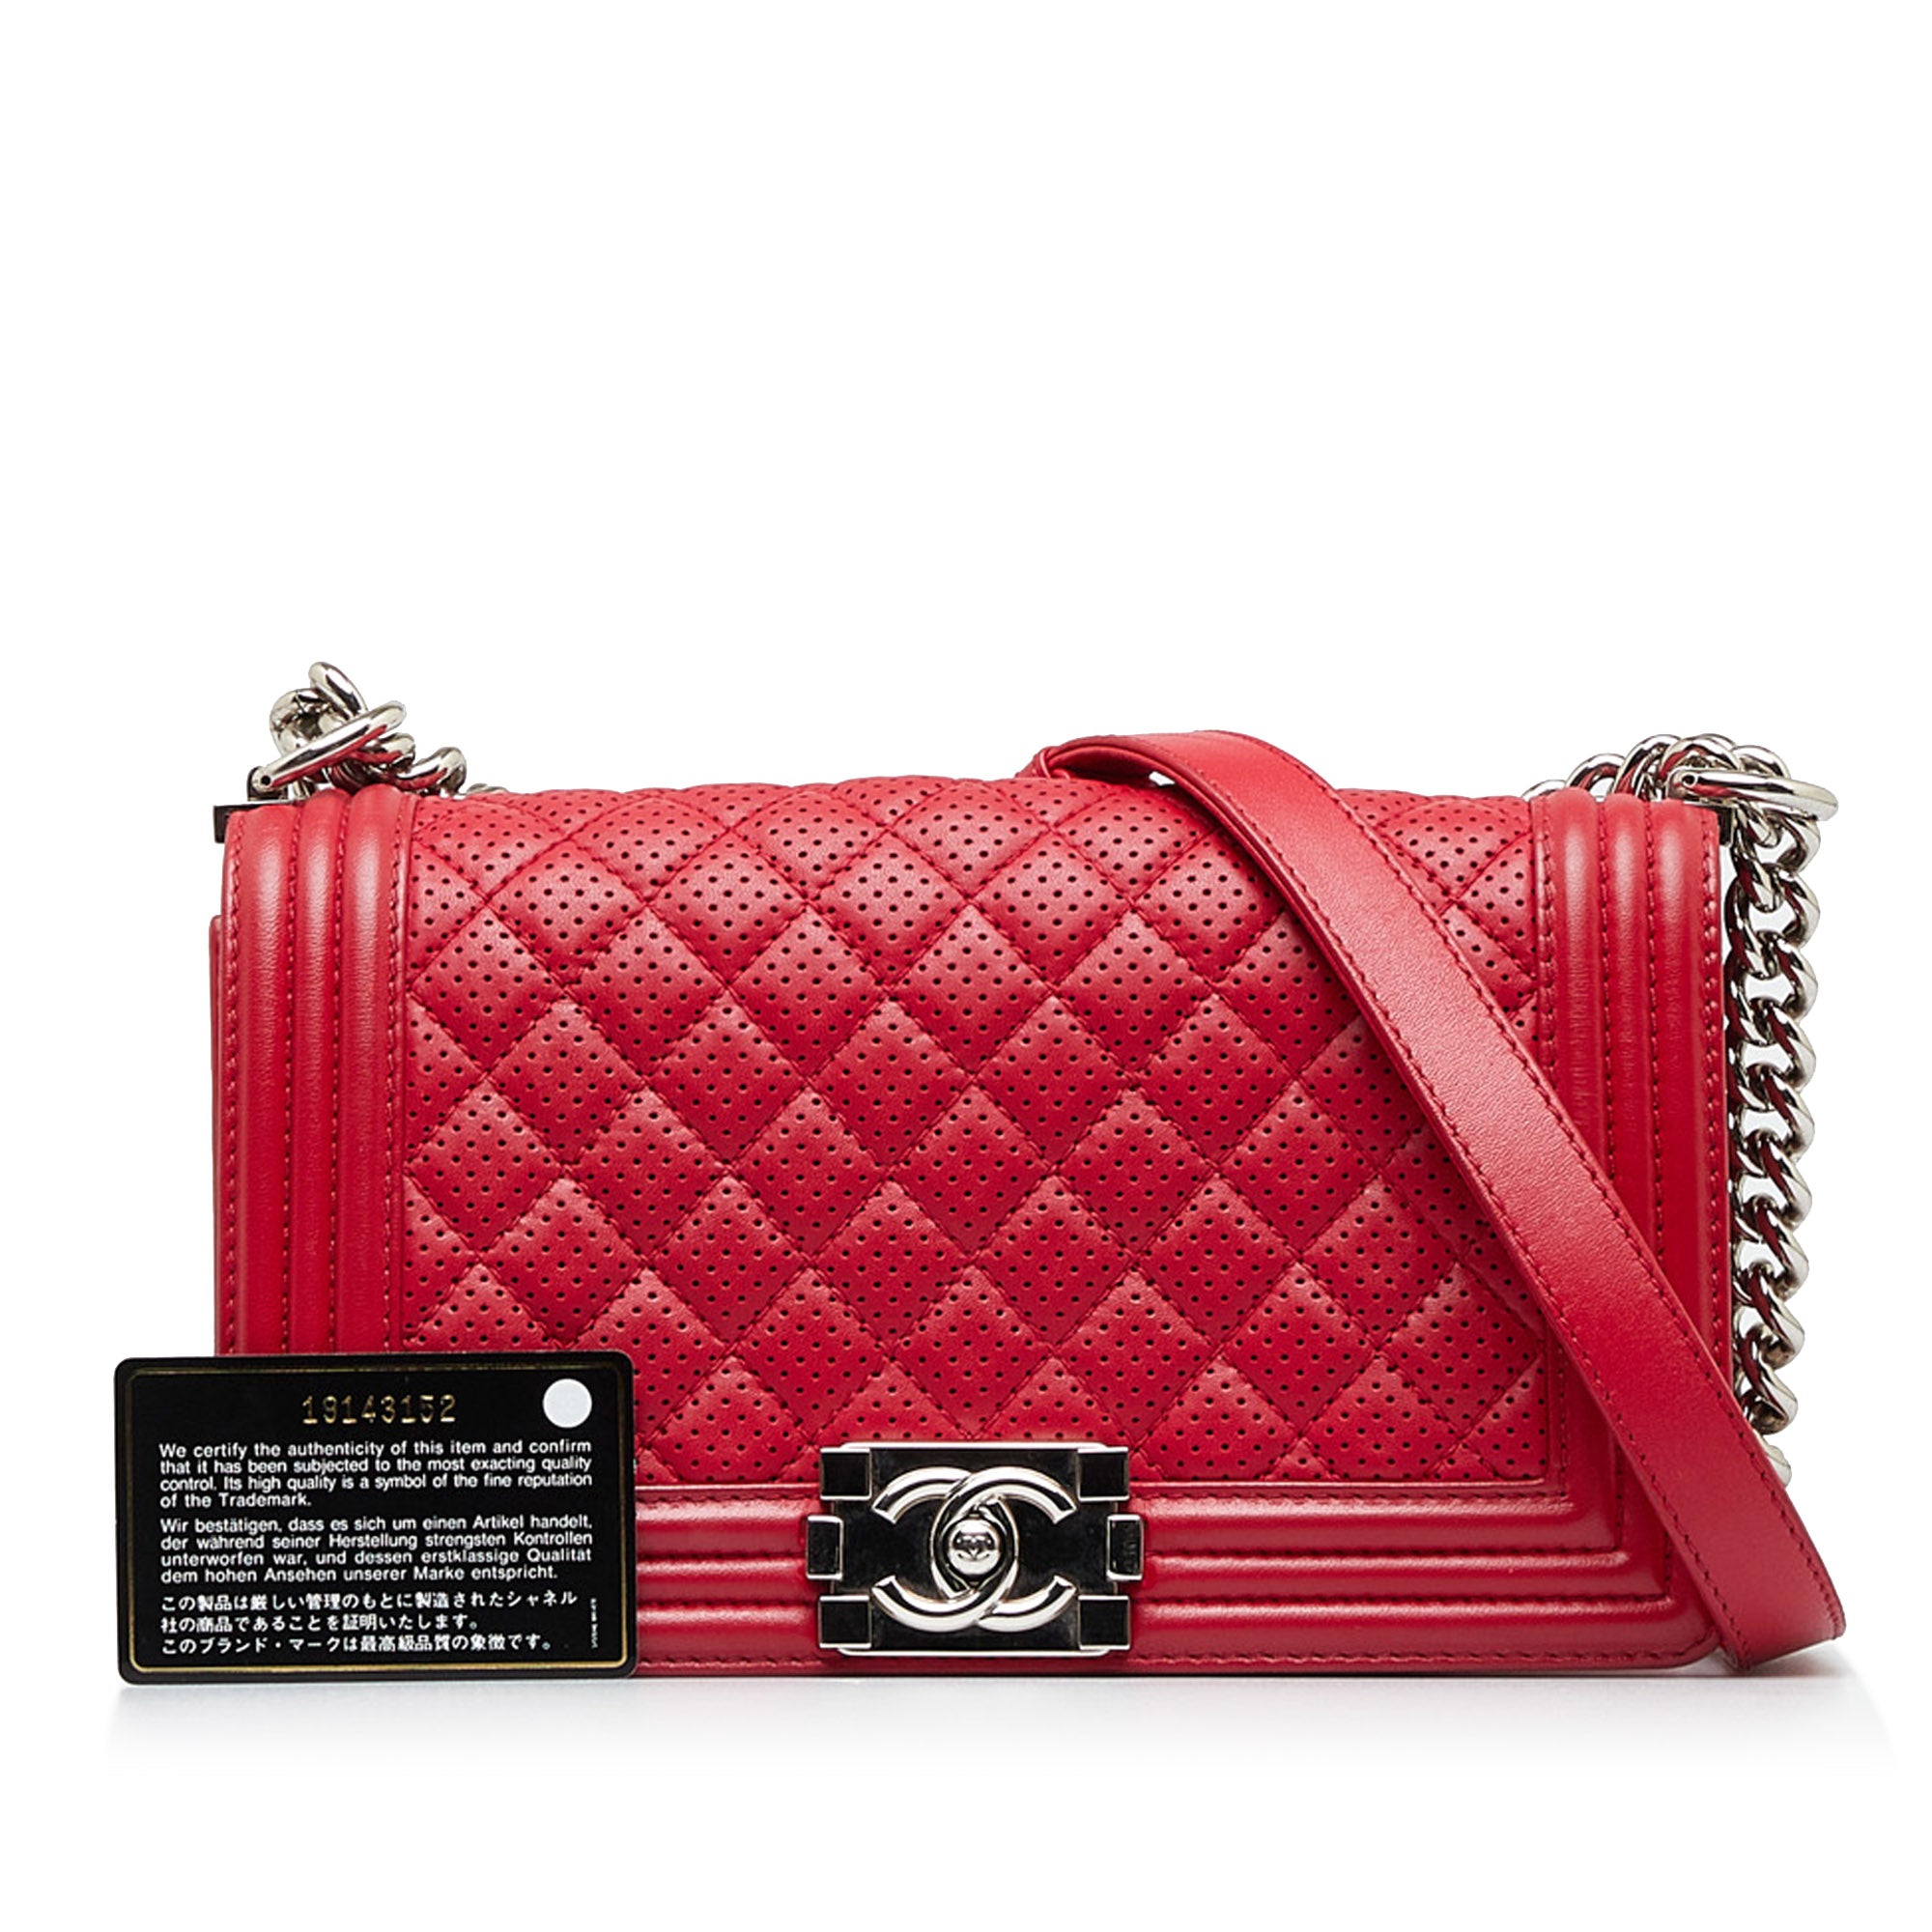 red large chanel bag